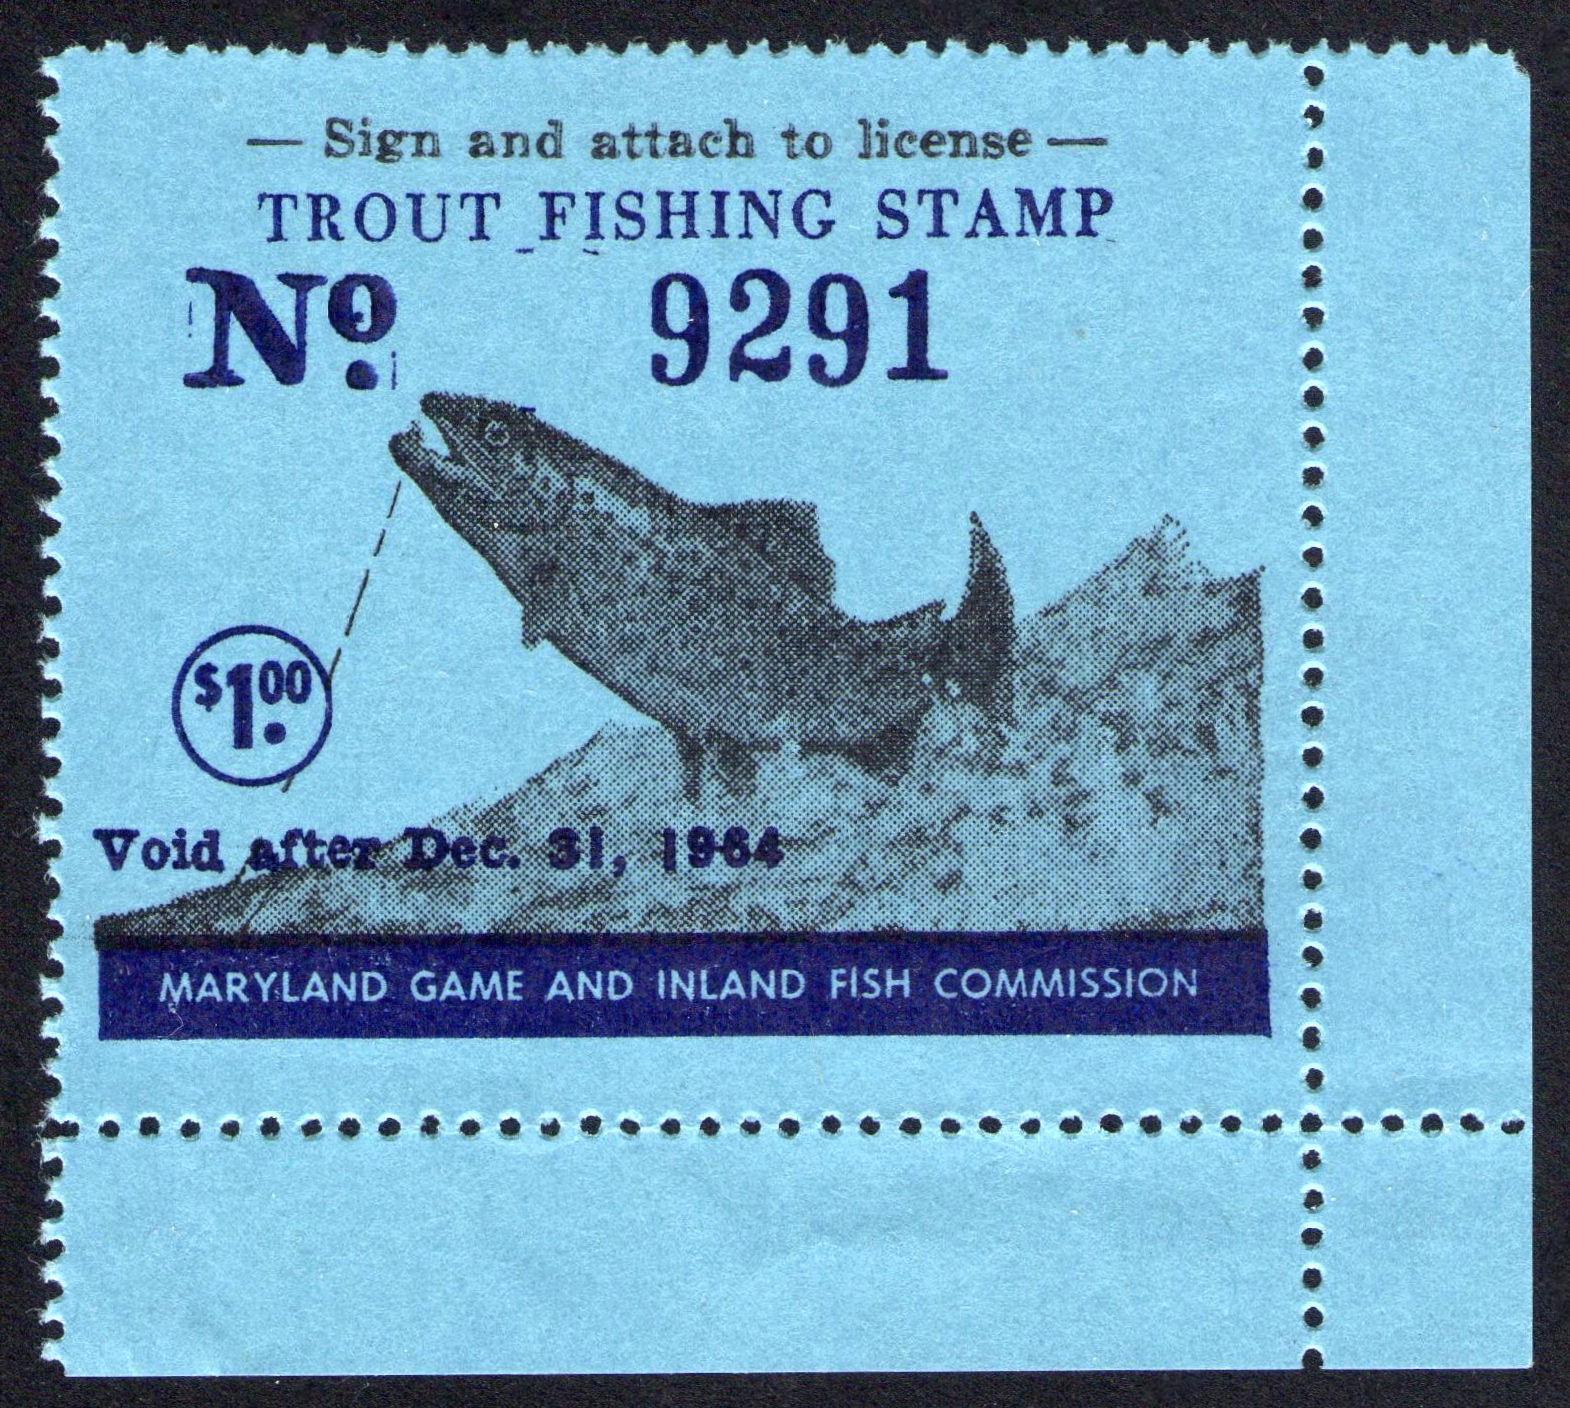 1964 Maryland Trout